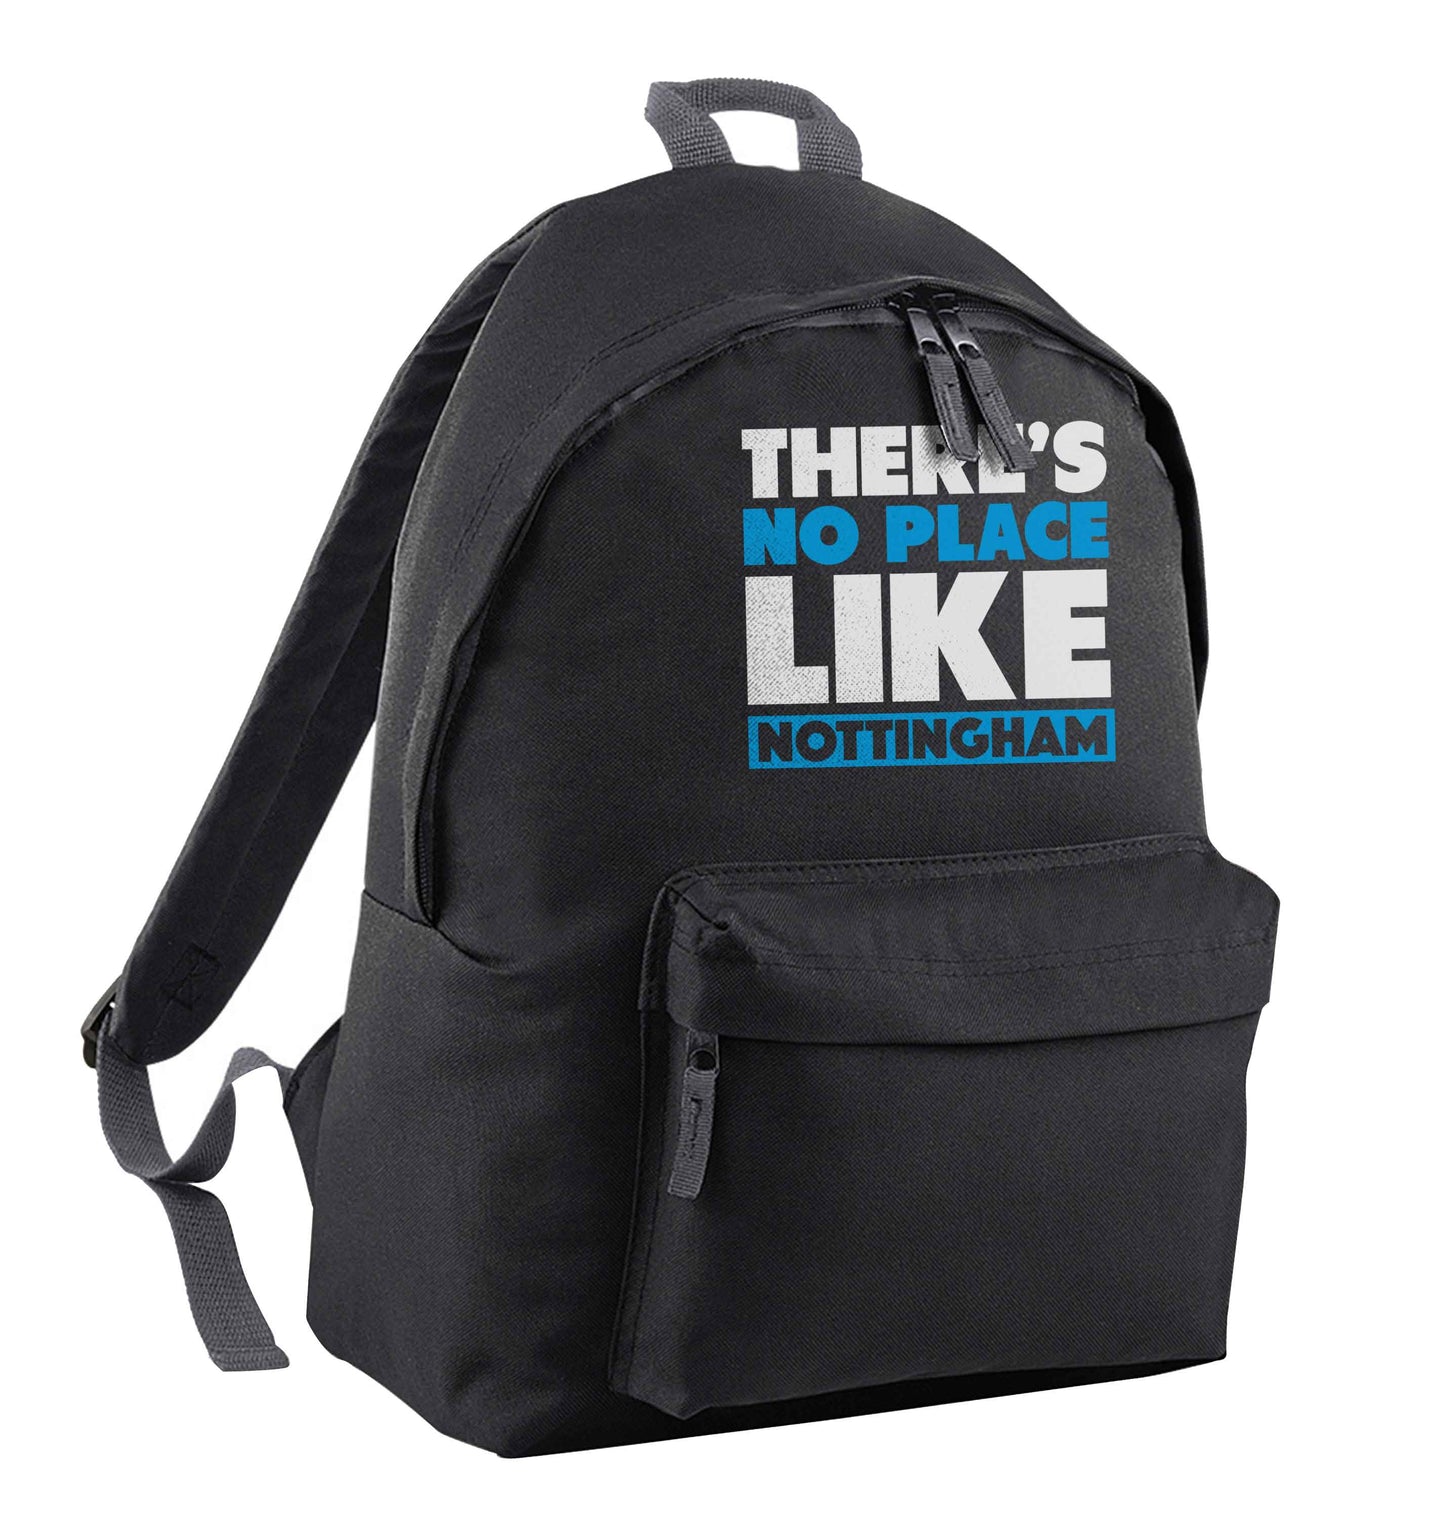 There's no place like Nottingham black adults backpack